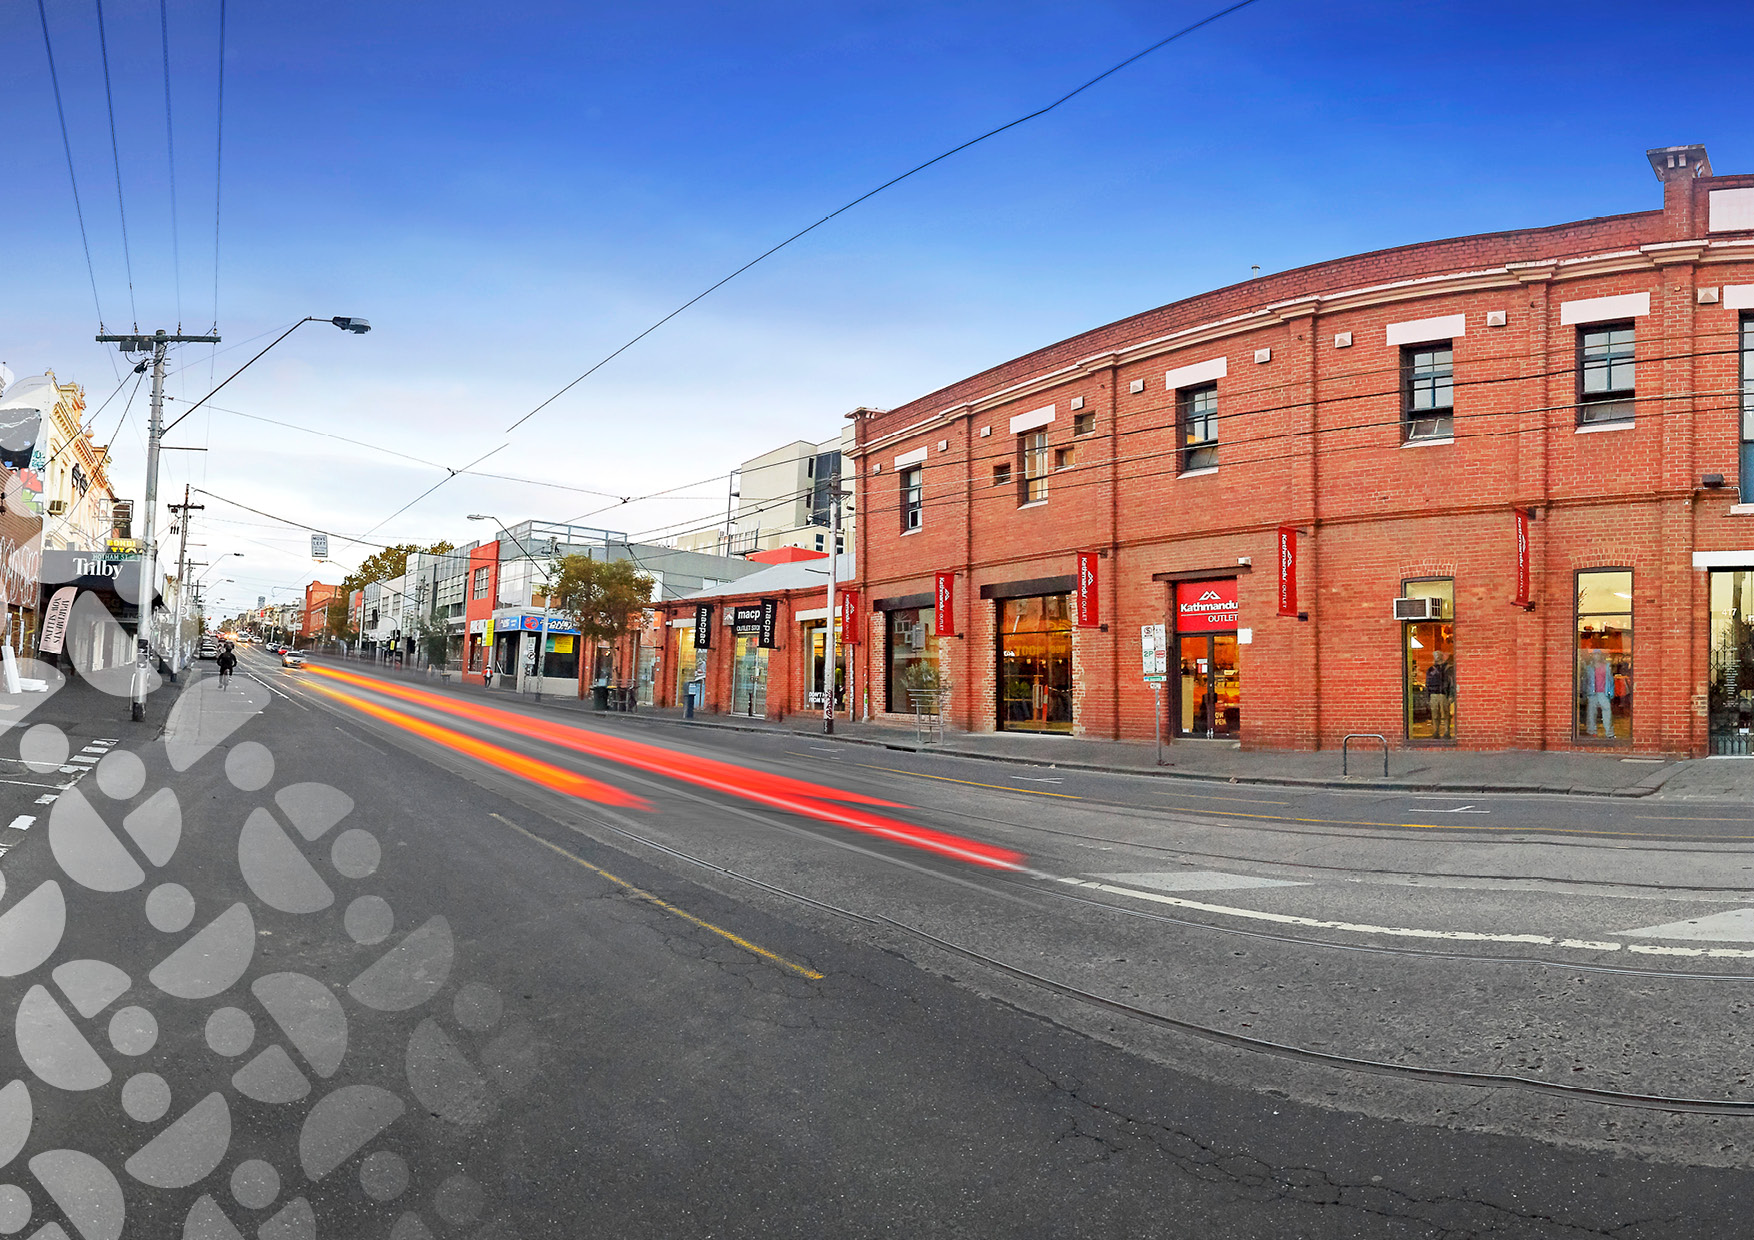 Sale The Smith & Leicester Holdings 411-421 Smith Street Fitzroy Real Estate Fitzroy Development Fitzroy Retail Commercial Real Estate TCI